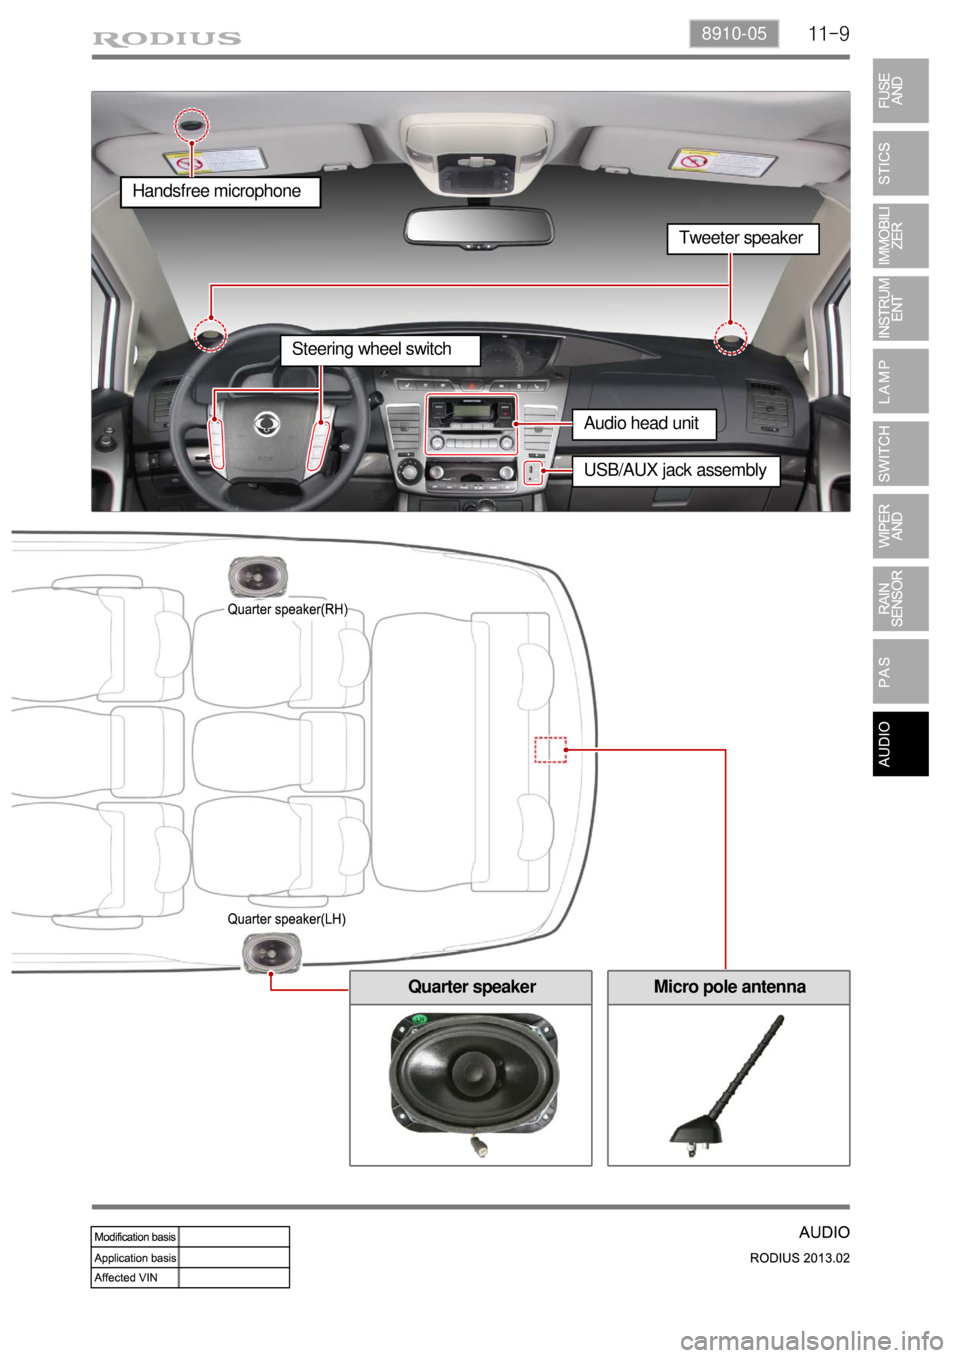 SSANGYONG TURISMO 2013  Service Manual 11-98910-05
Micro pole antennaQuarter speaker
Handsfree microphone
Tweeter speaker
Audio head unit
Steering wheel switch
USB/AUX jack assembly 